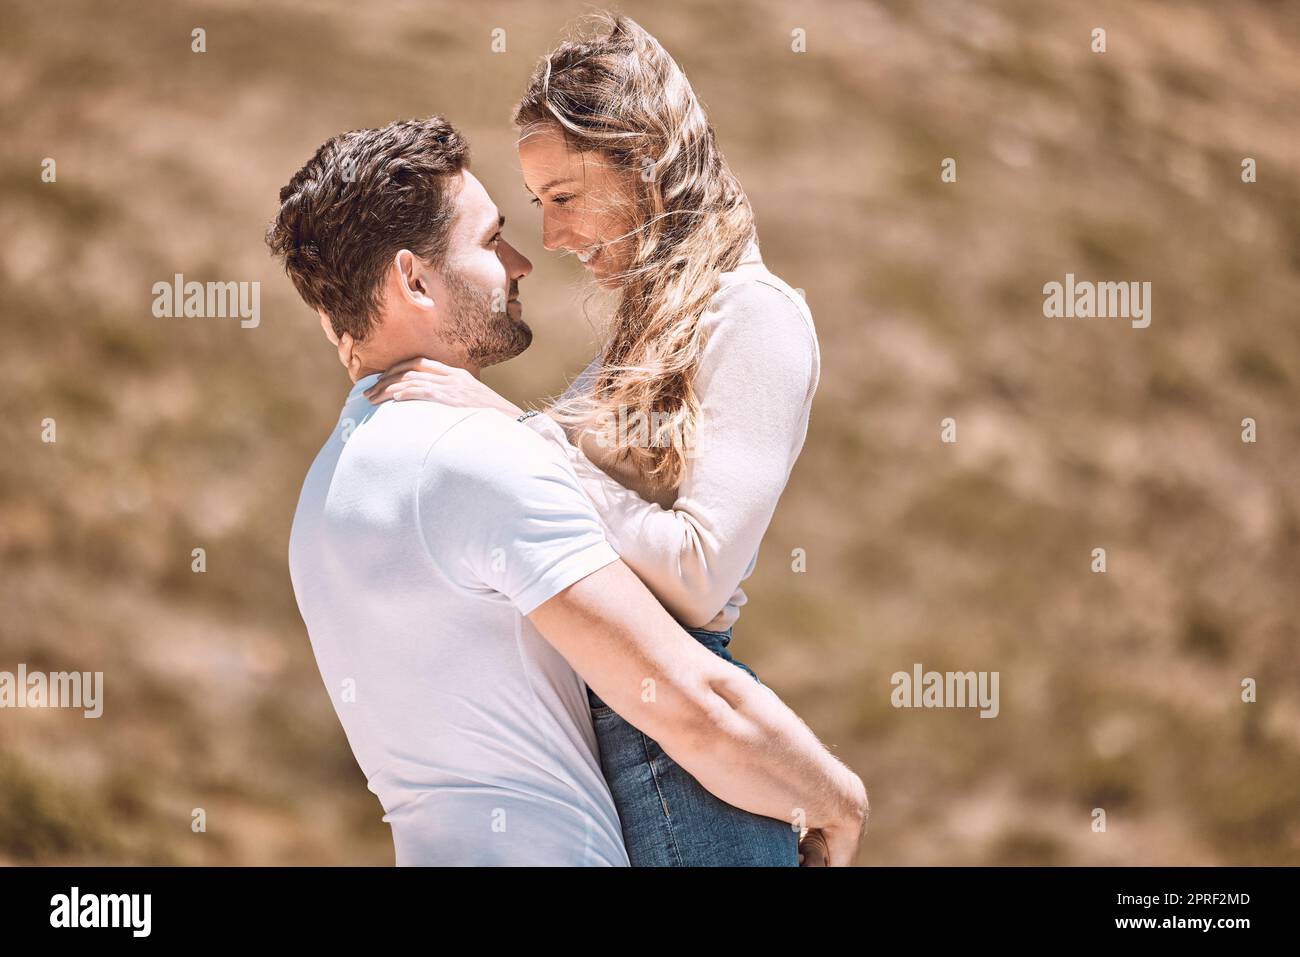 A young loving, affectionate and caring couple bonding while enjoying the day outdoors in nature. Happy, in love and smiling man embracing his wife wh Stock Photo